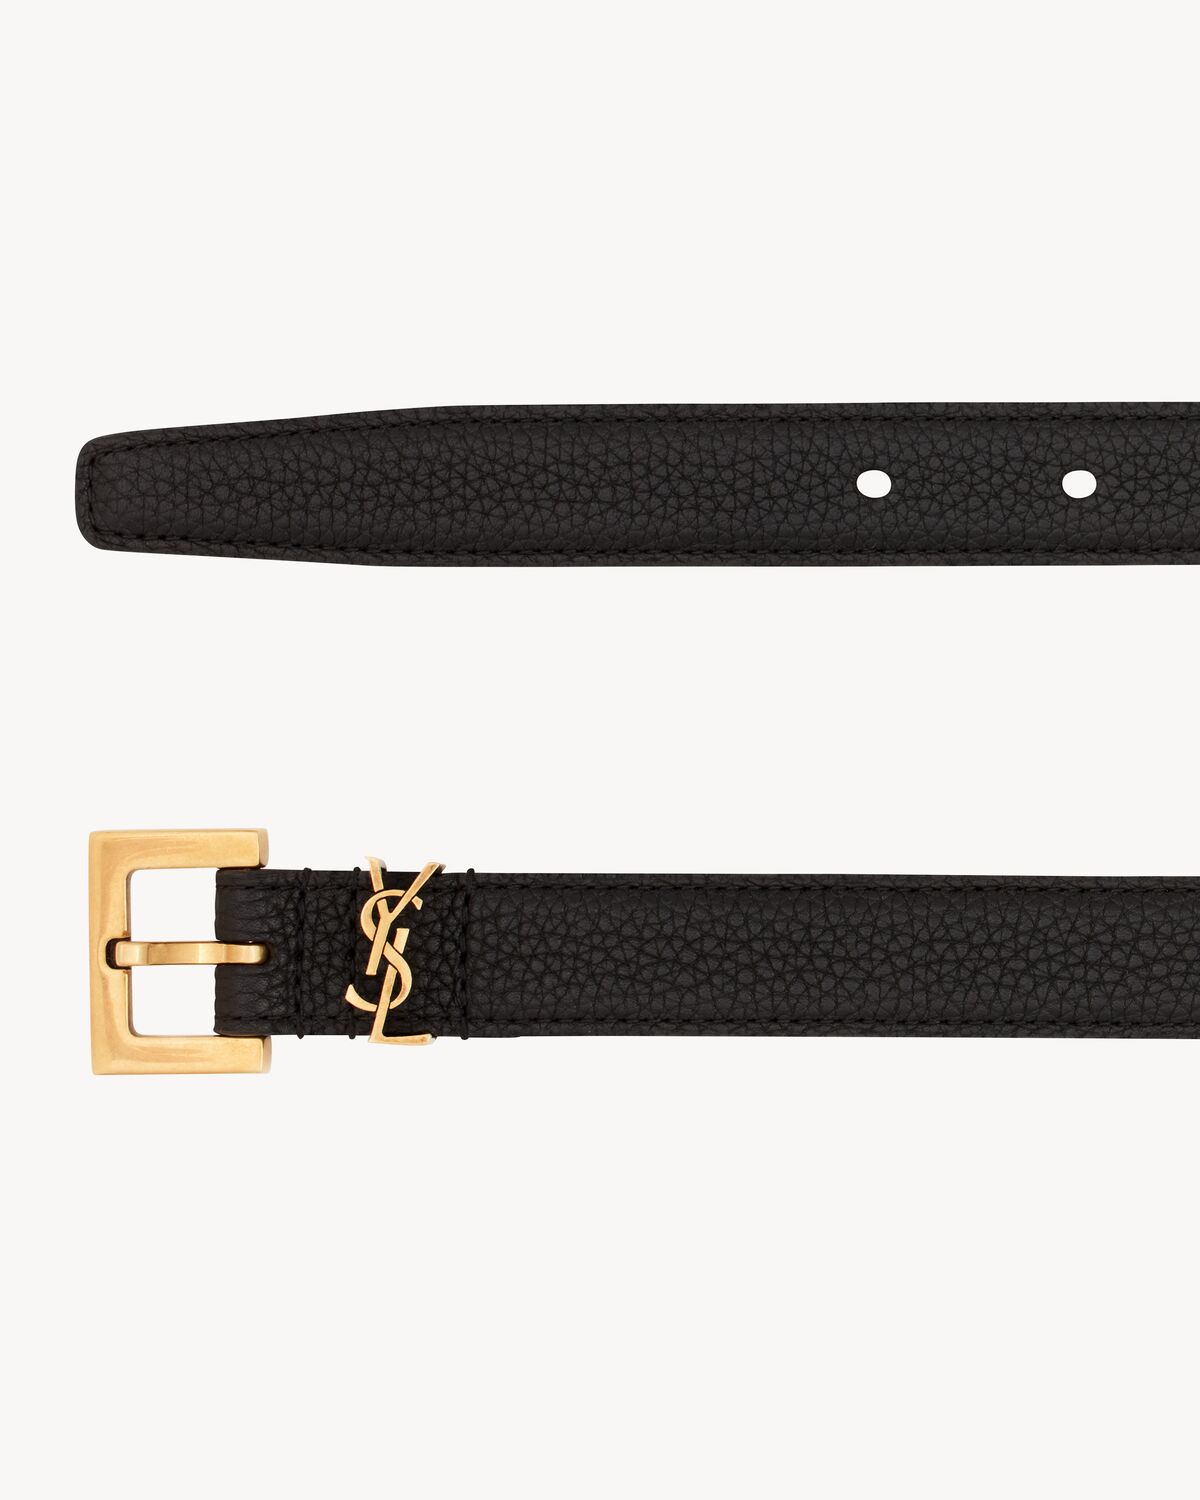 CASSANDRE THIN BELT WITH SQUARE BUCKLE IN GRAINED LEATHER